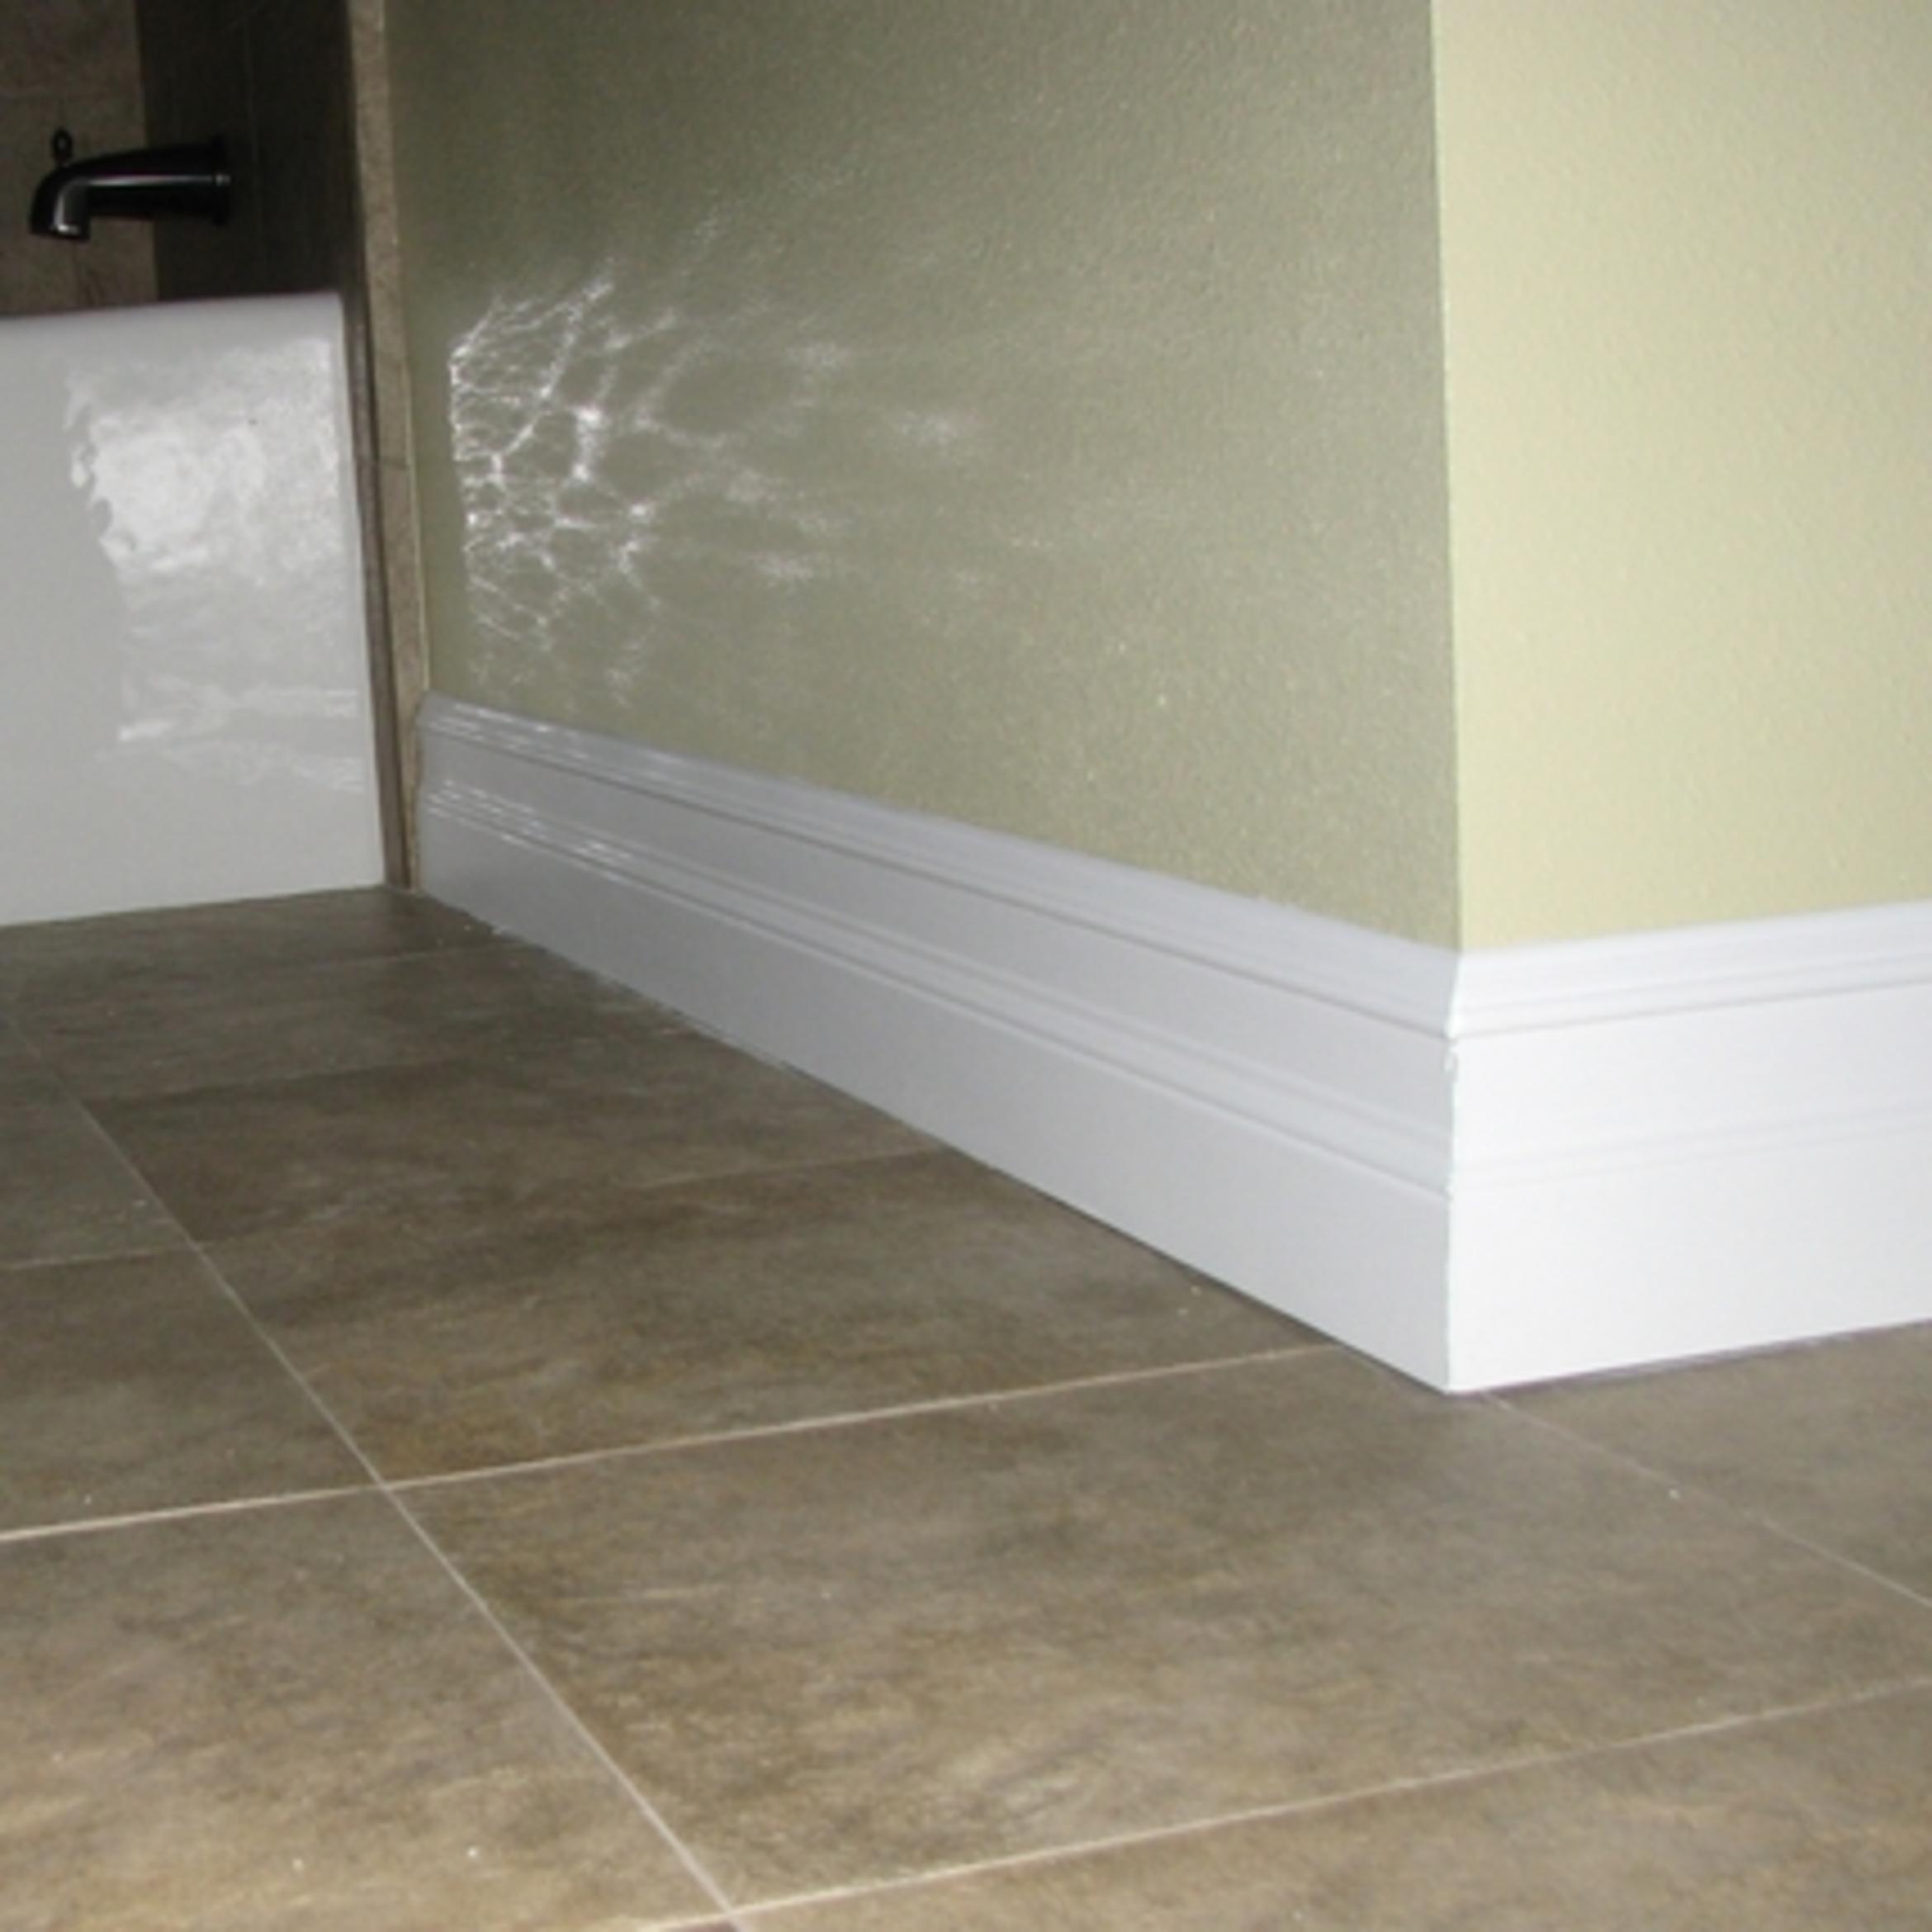 New tall baseboards, painted in a high gloss white to tie in the tub